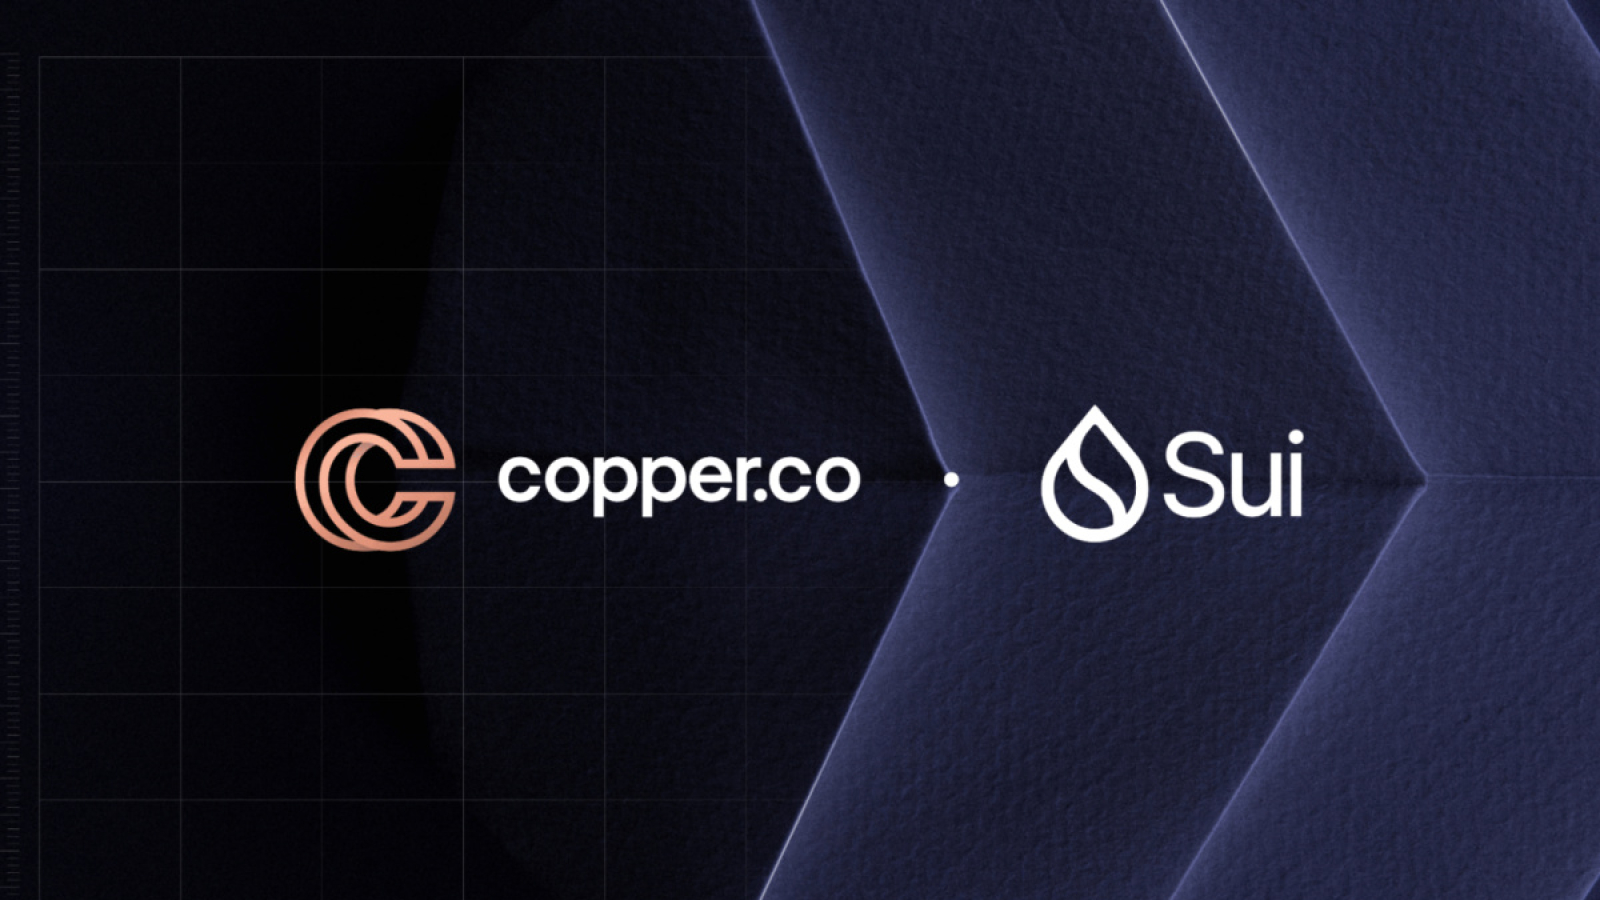 Copper & Sui partner to build out full institutional accessibility